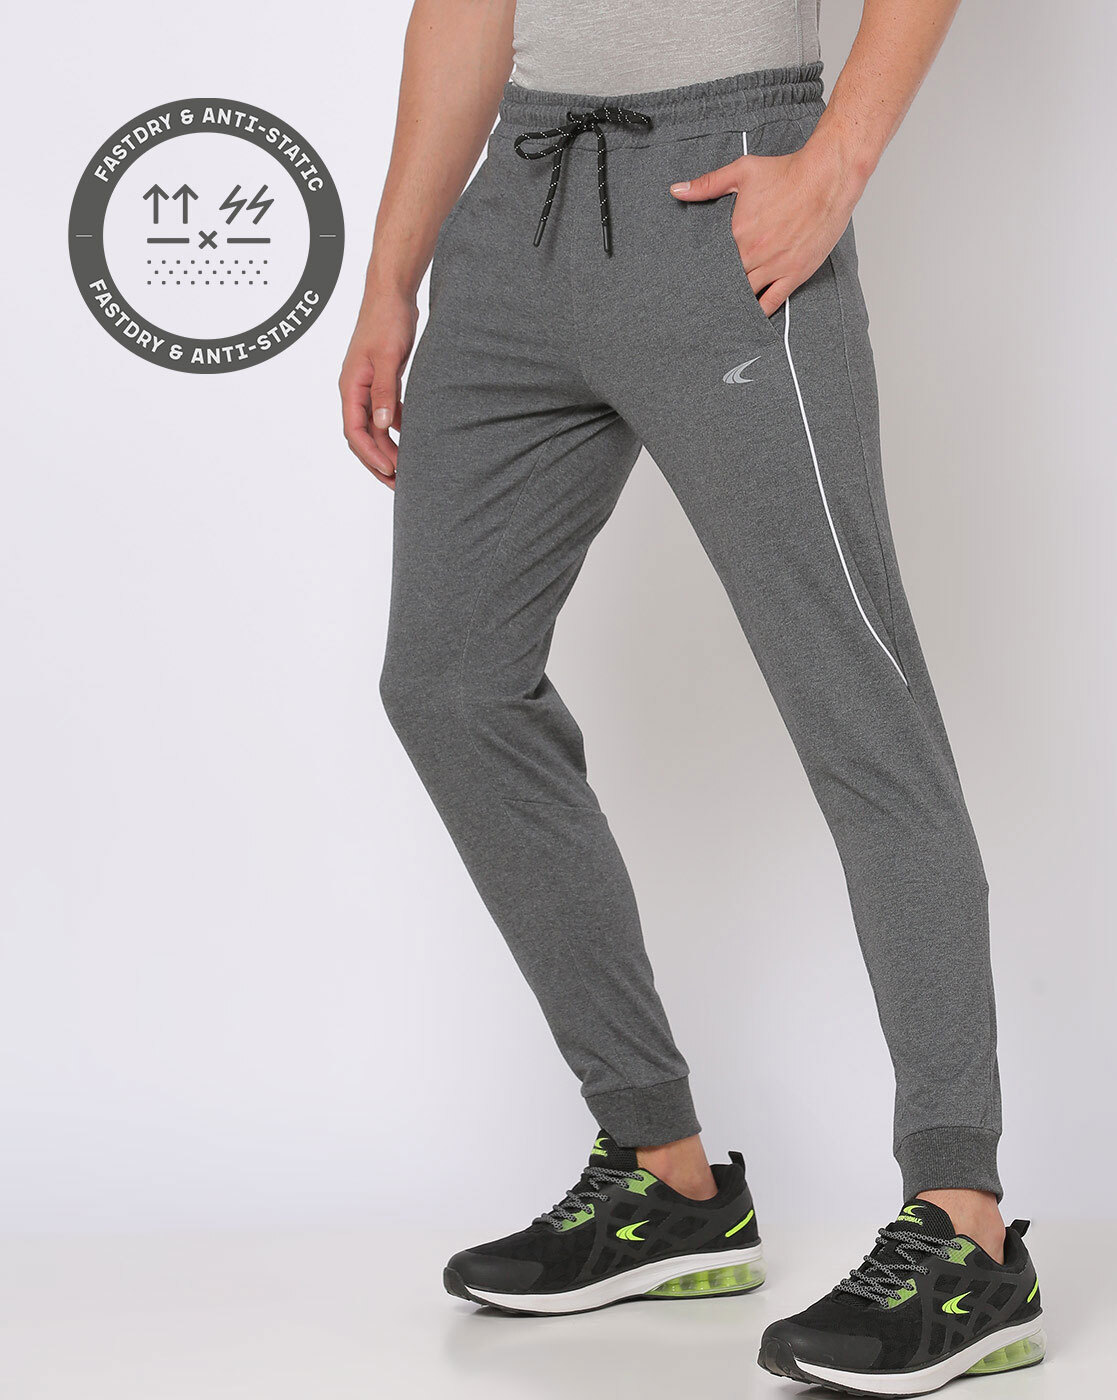 Jeans & Pants | Performax Trackpants. Grey And Blue Color | Freeup